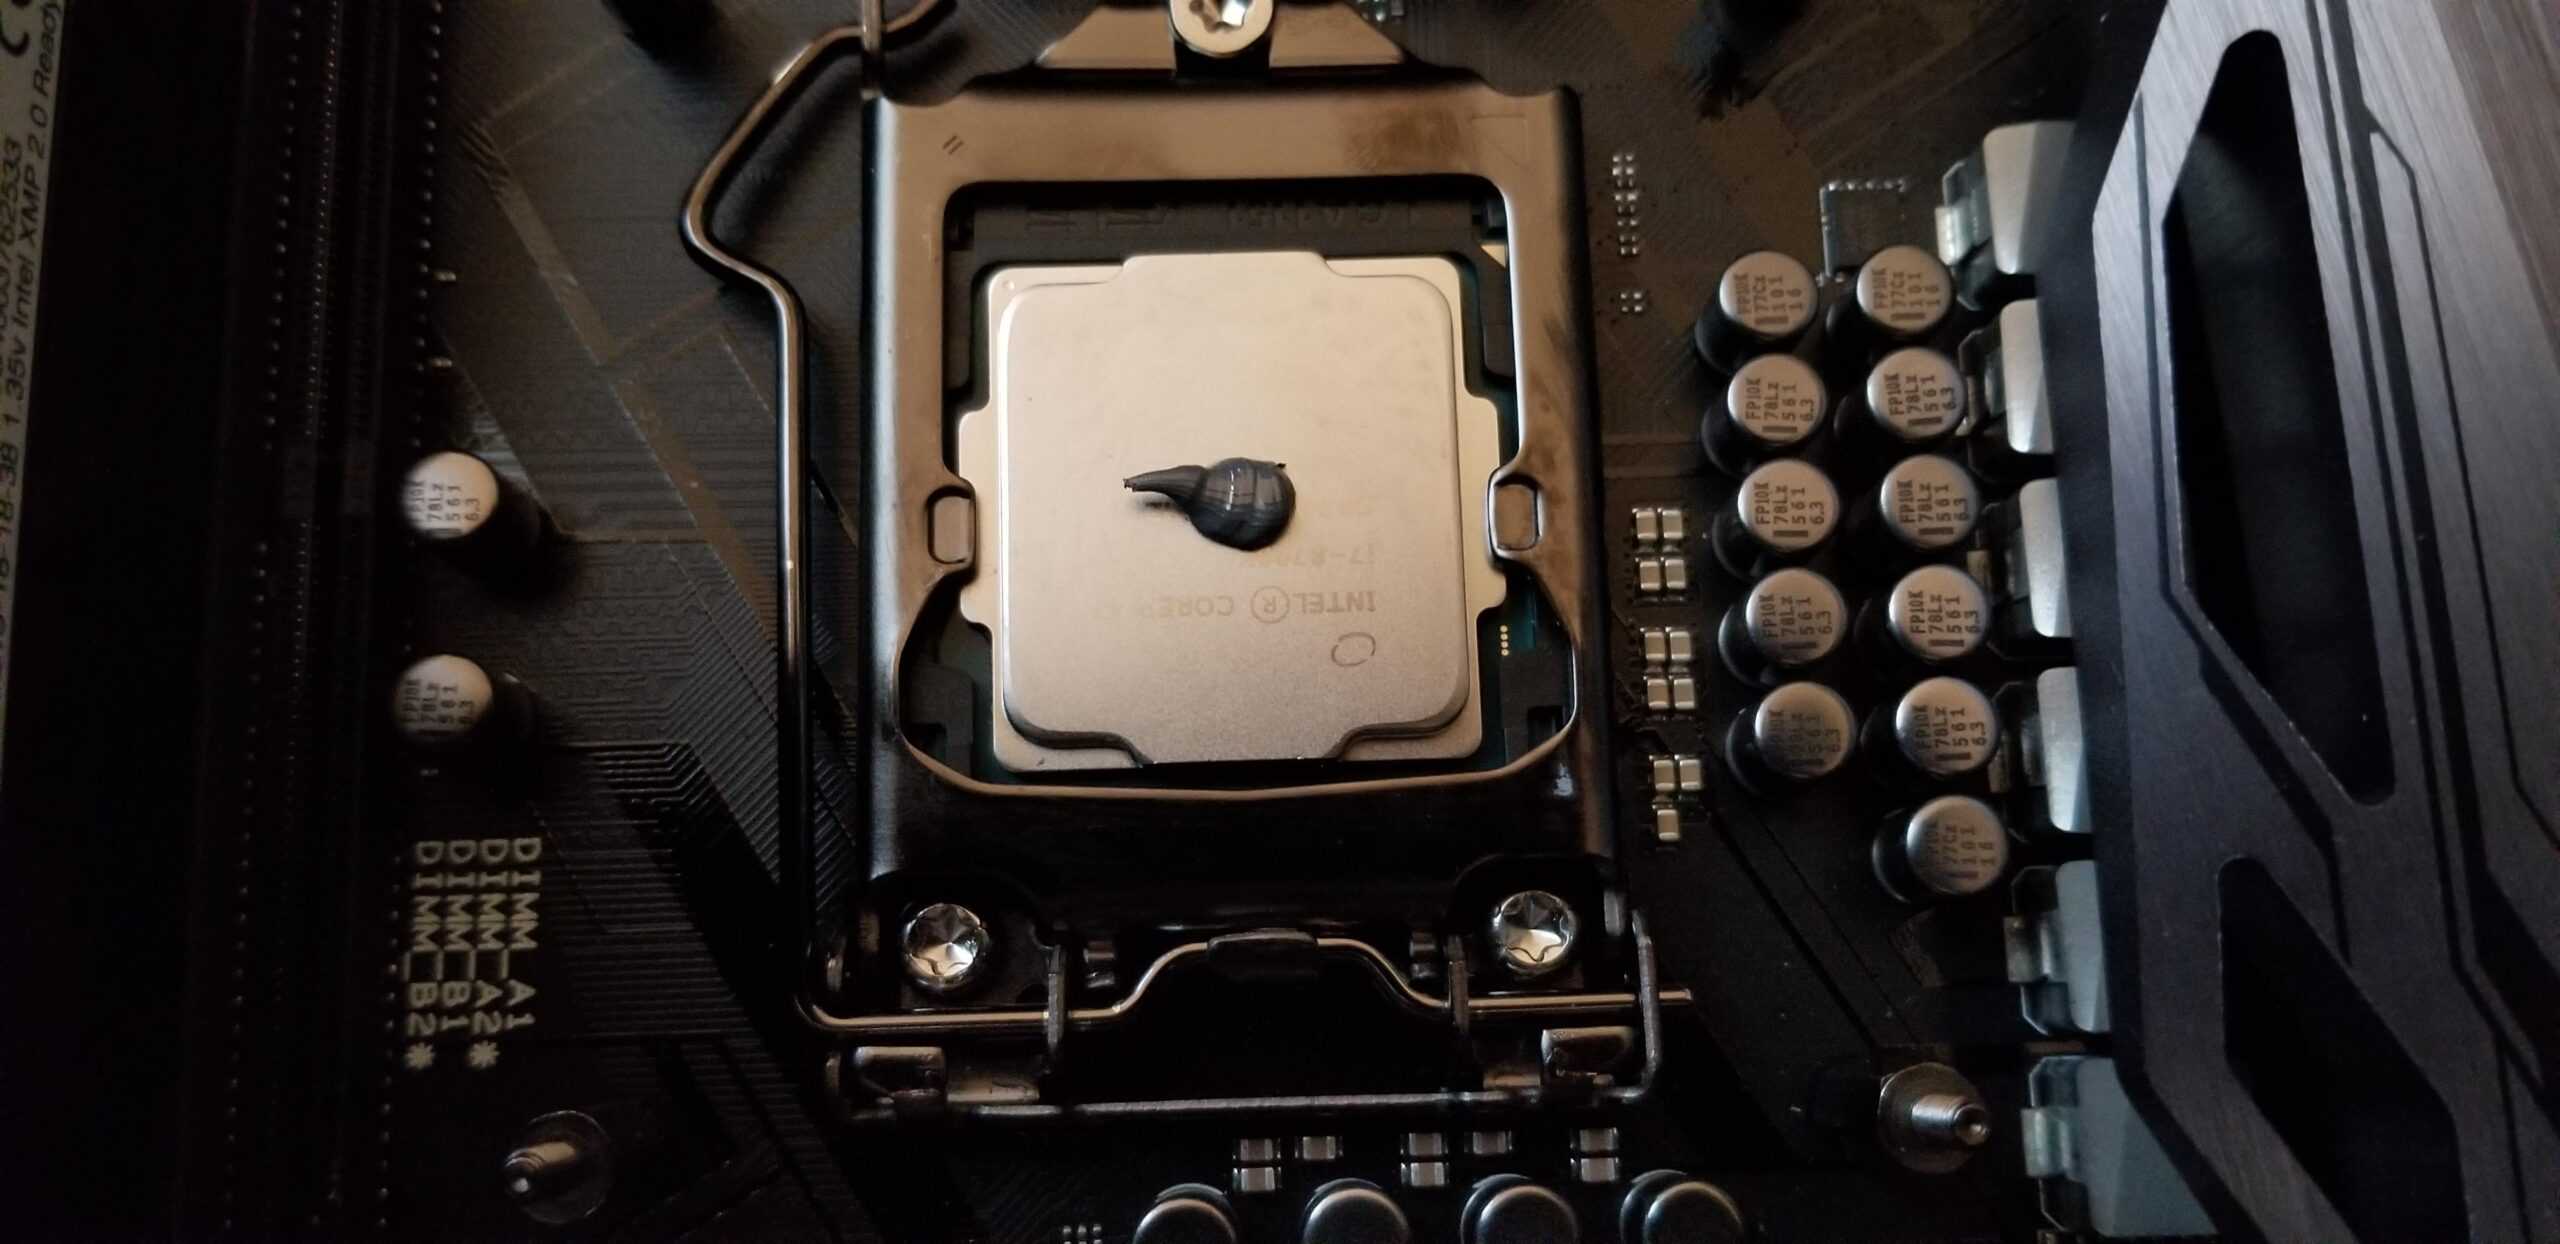 Do CPUs come with thermal paste?